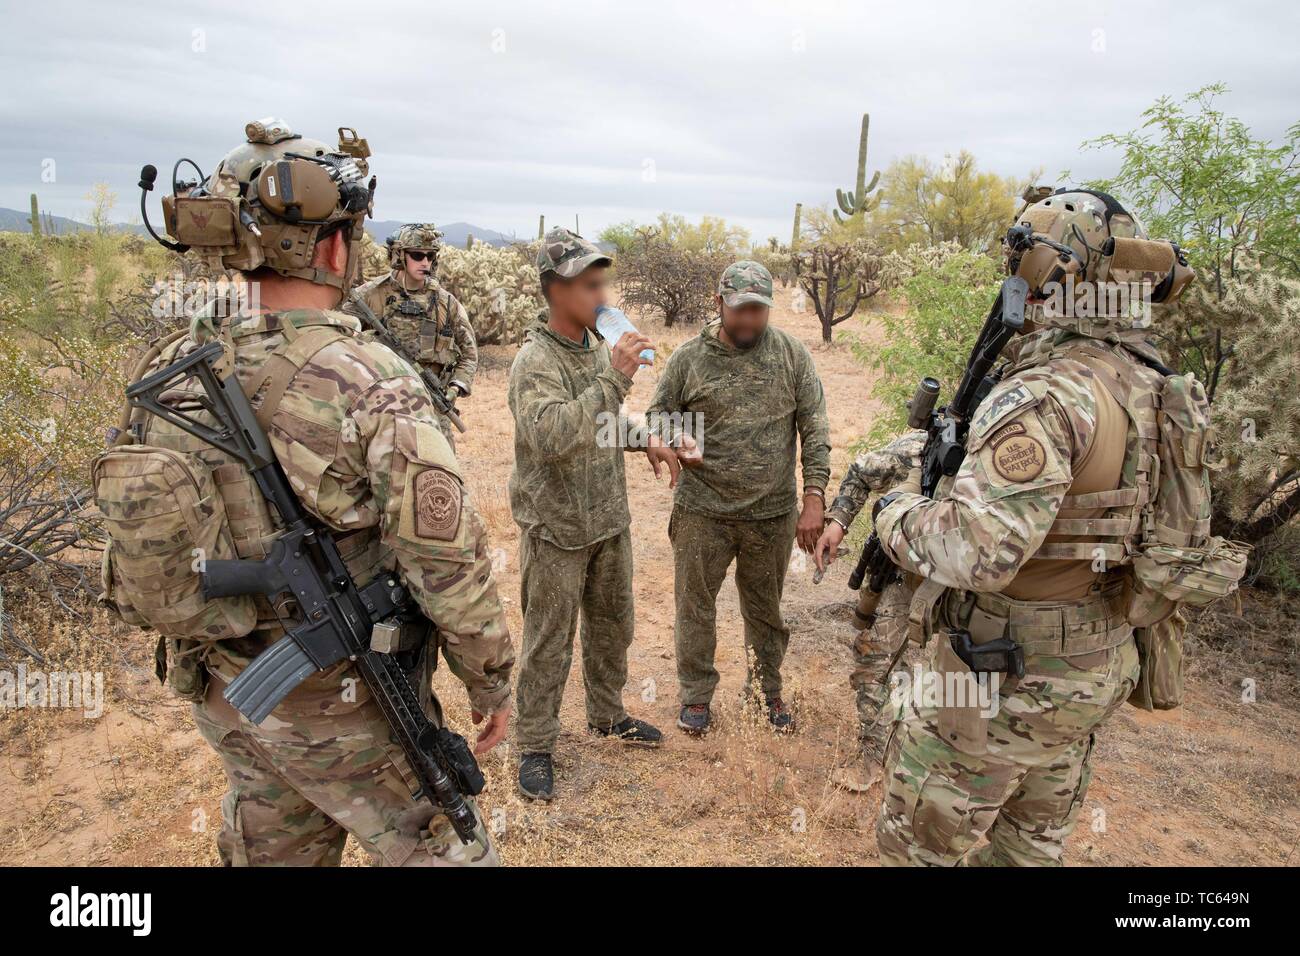 U.S. Border Patrol provide water to a group of illegal migrants after they were apprehended crossing from Mexico on the Tohono Oʼodham Indian Reservation May 22, 2019 near Pisinemo, Arizona. The faces are obscured by the Border Patrol to protect their identity. Stock Photo